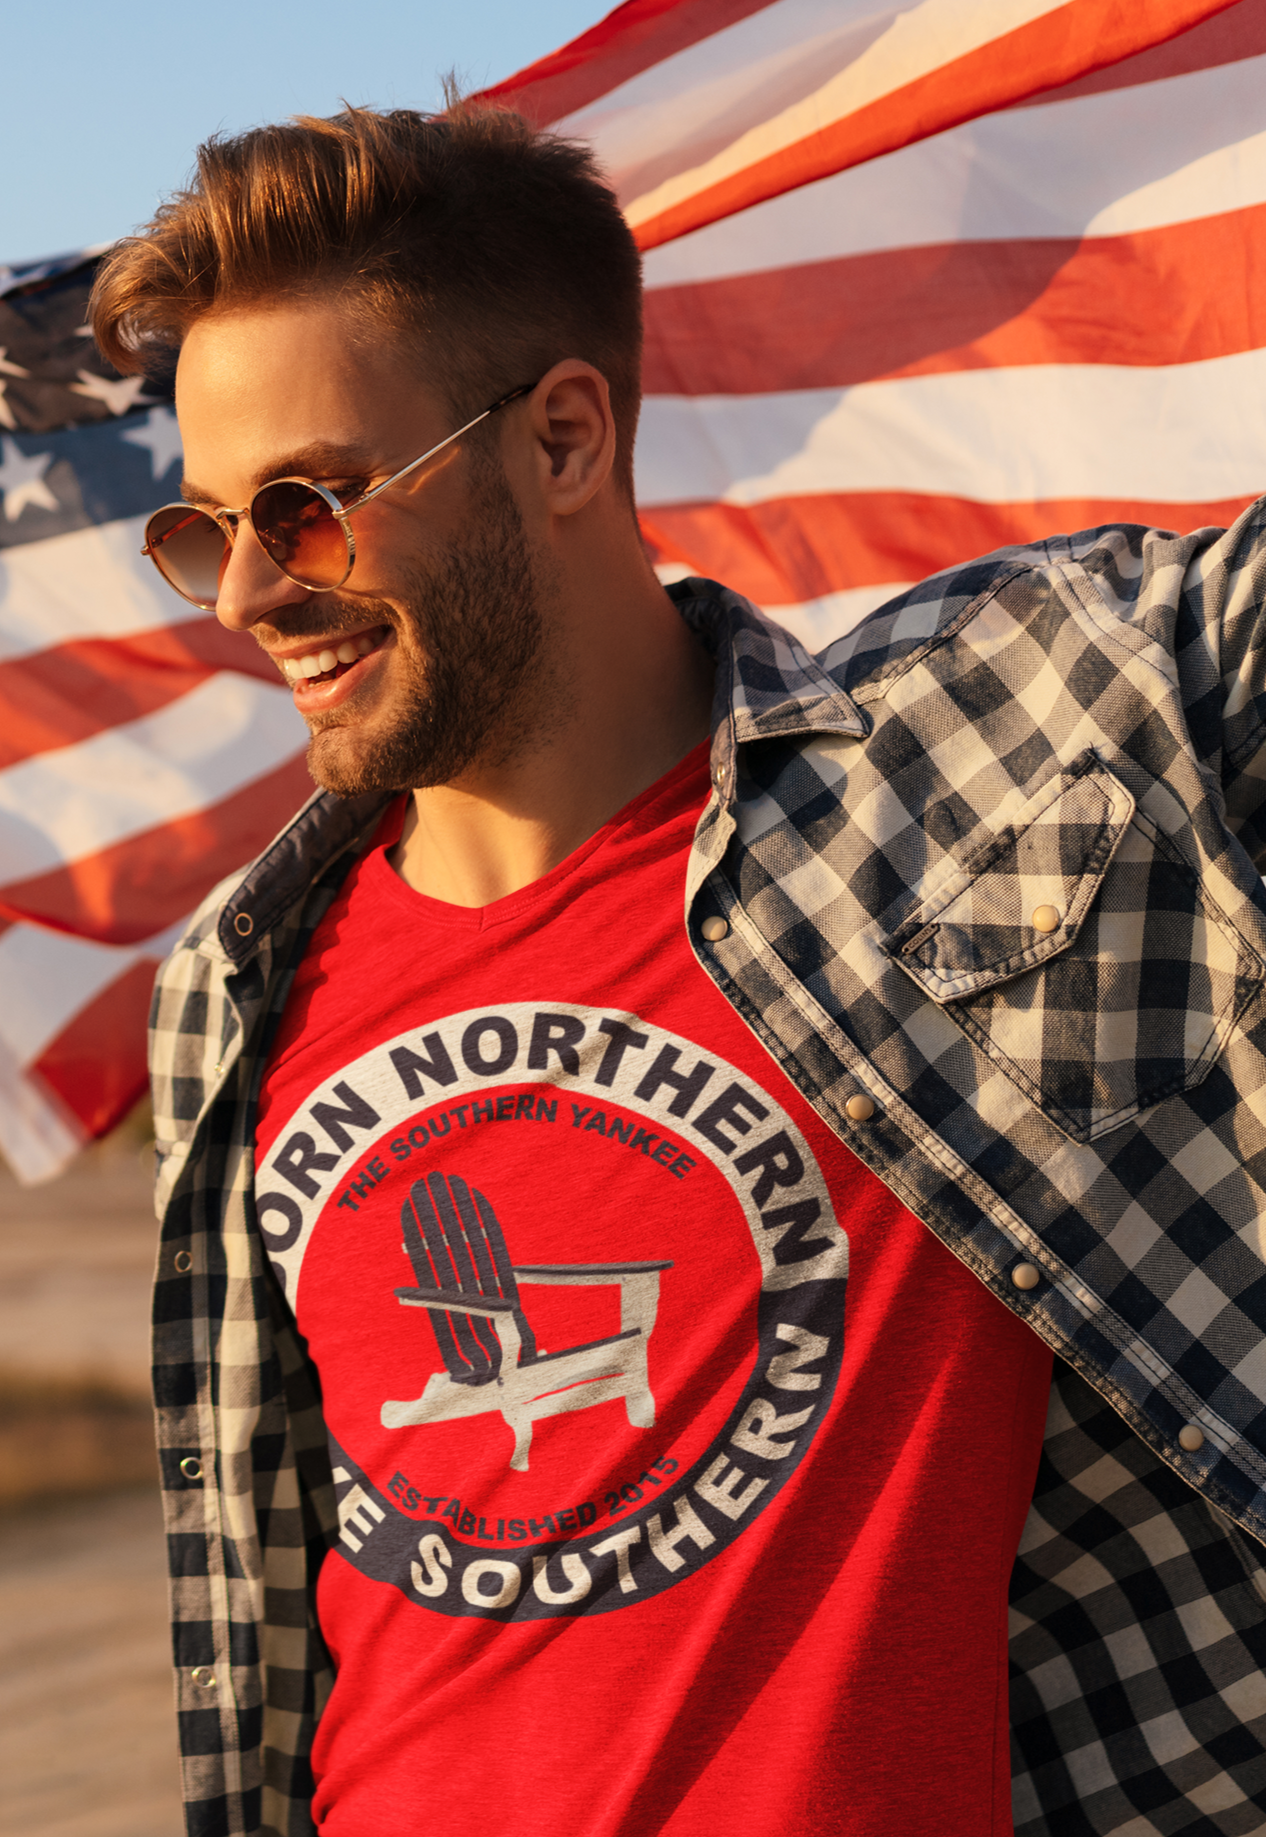 Born Northern Live Southern Classic Tee - Northern Roots Southern